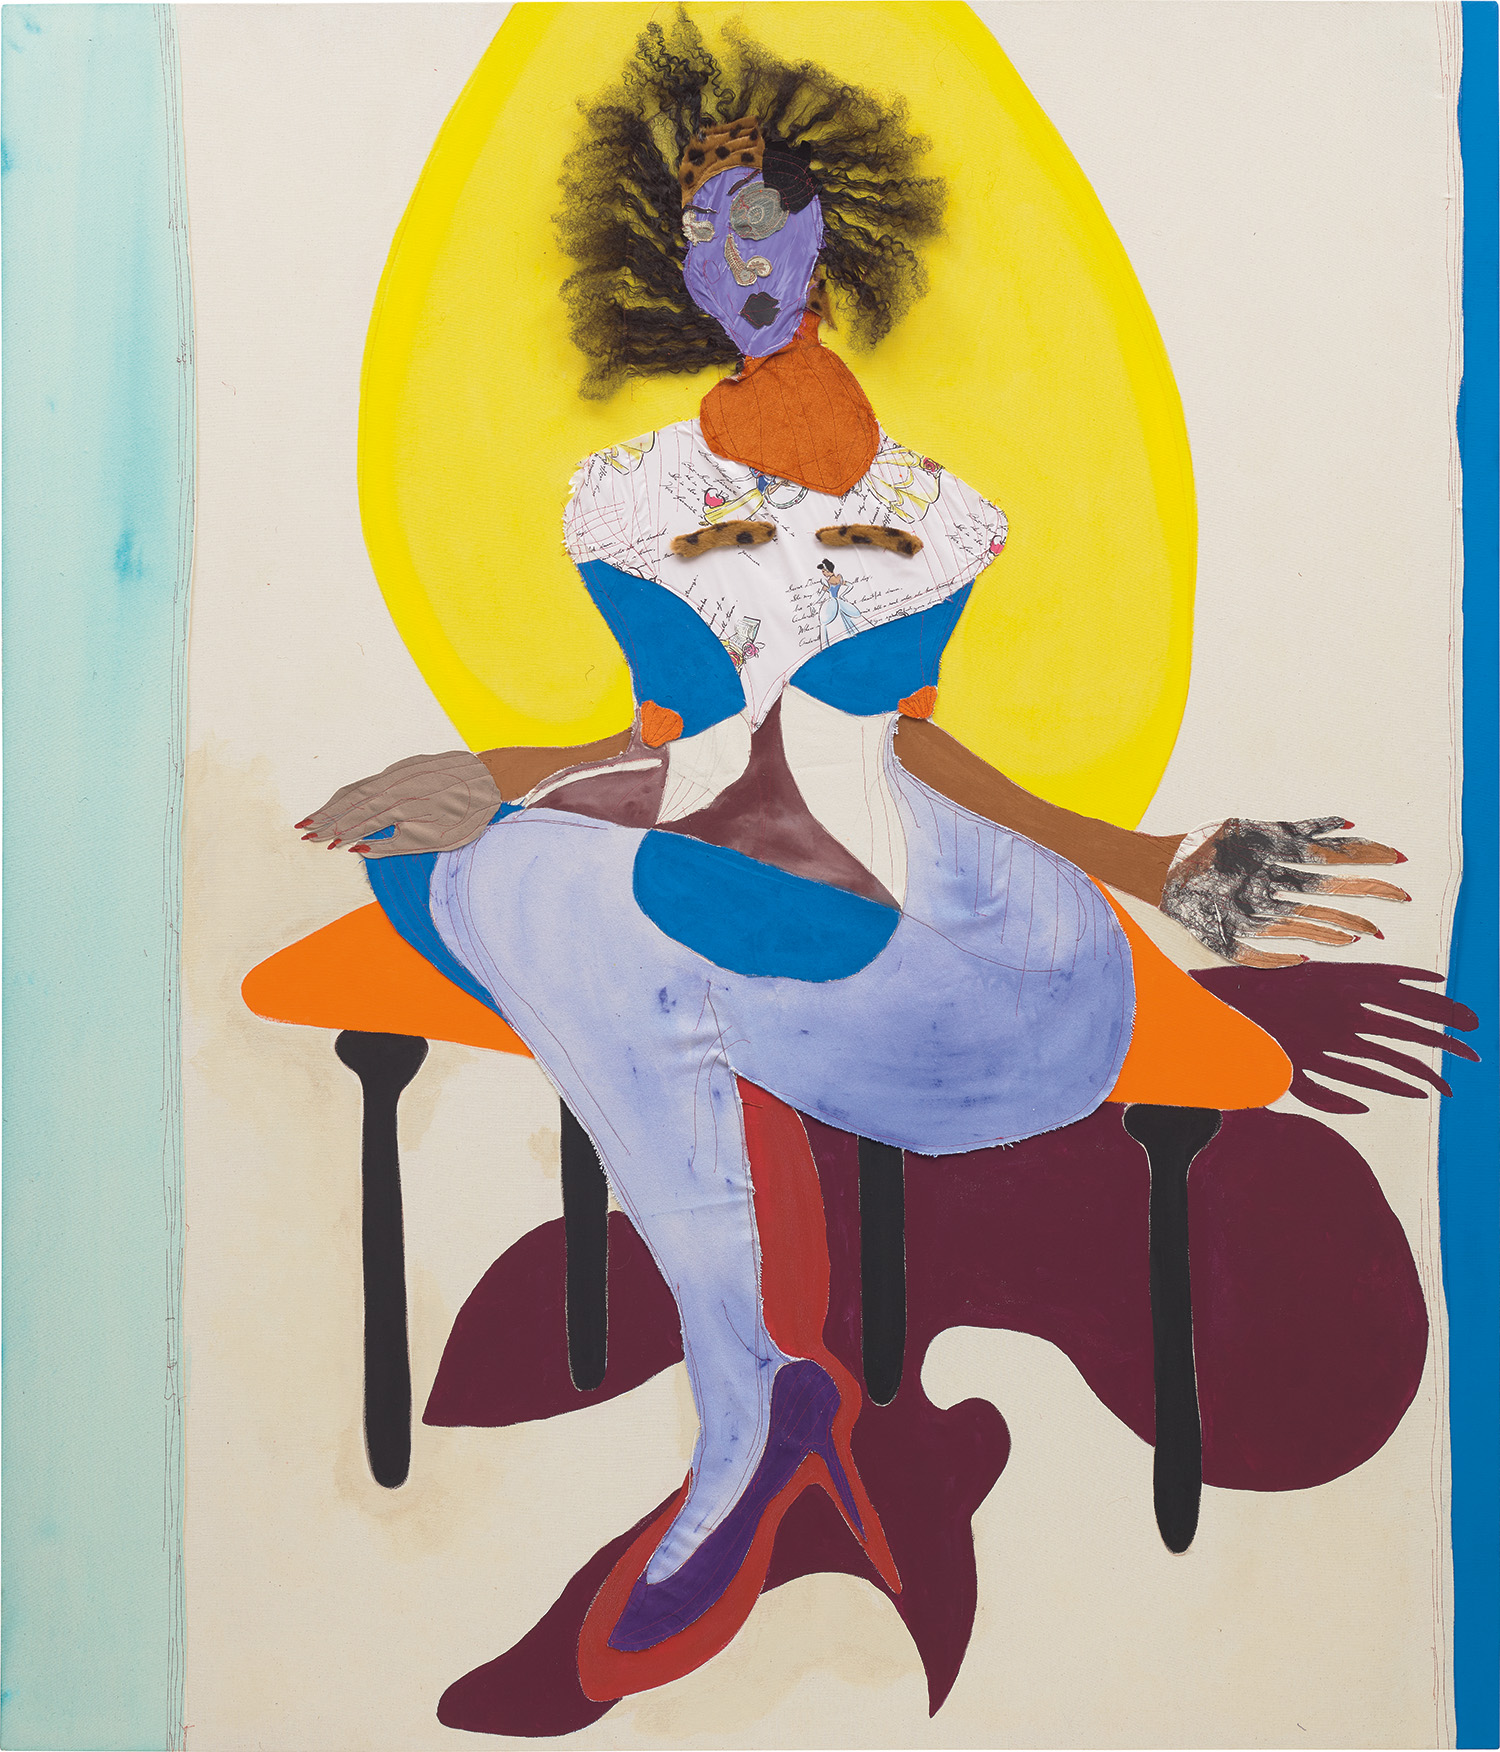 TSCHABALALA SELF Princess signed and dated 'Tschabalala Self Tschabalala Self 2017' on the overlap fabric, acrylic, flashe, oil and human hair on canvas 213 x 183 cm (83 7/8 x 72 in.) Executed in 2017. Estimate £150,000 - 250,000  SOLD FOR £435,000